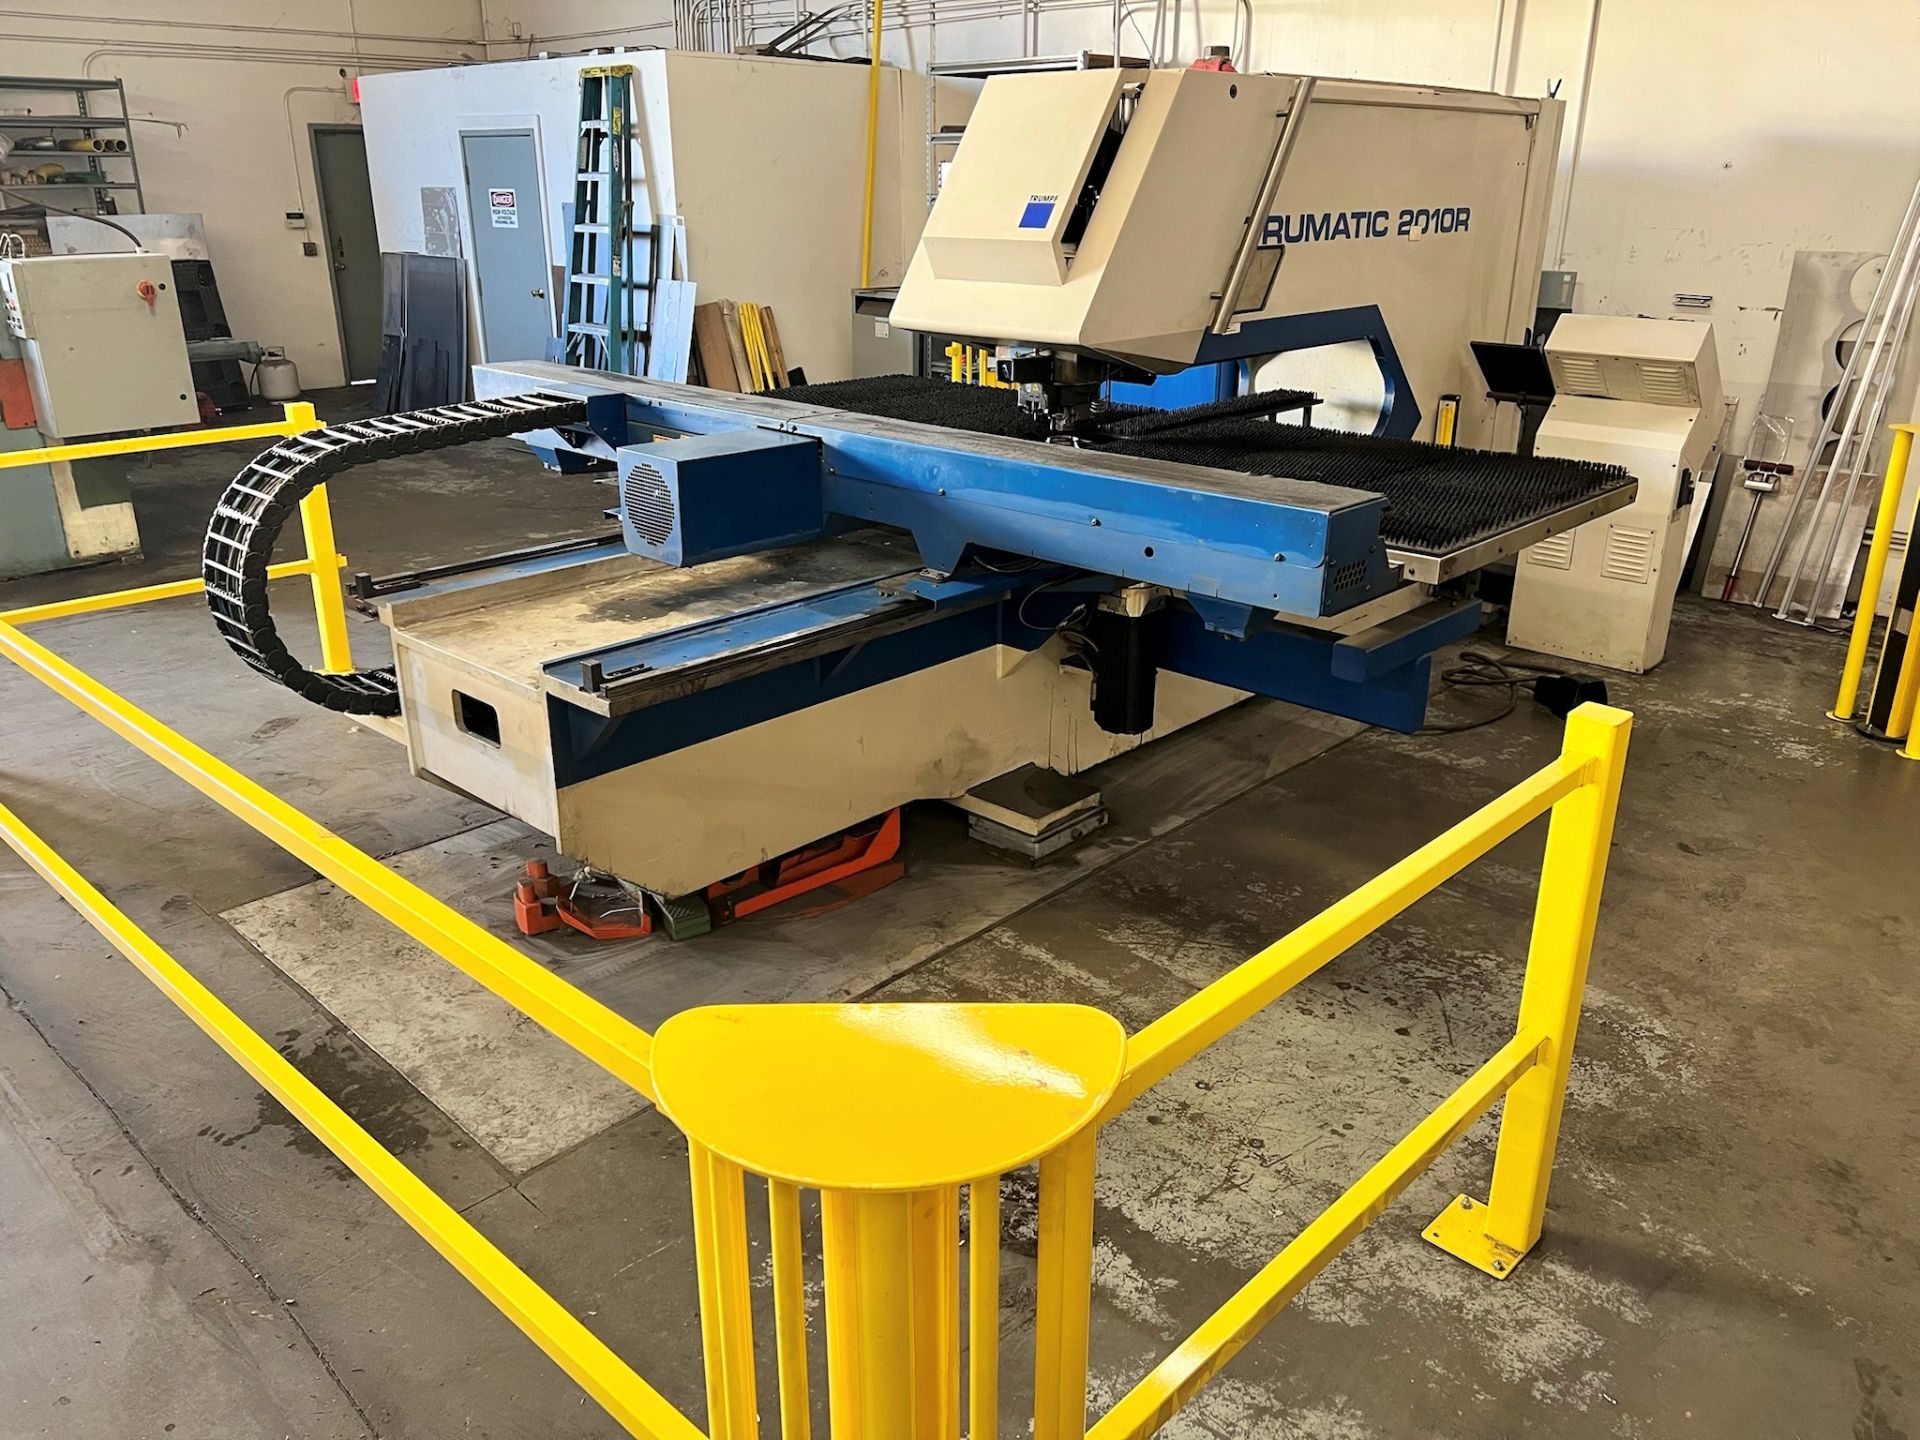 2006 TRUMPF TRUMATIC 2010R CNC TURRET PUNCH, 50" X 50" TABLE, MULTI SET, PUNCH TOOLING AND CABINETS